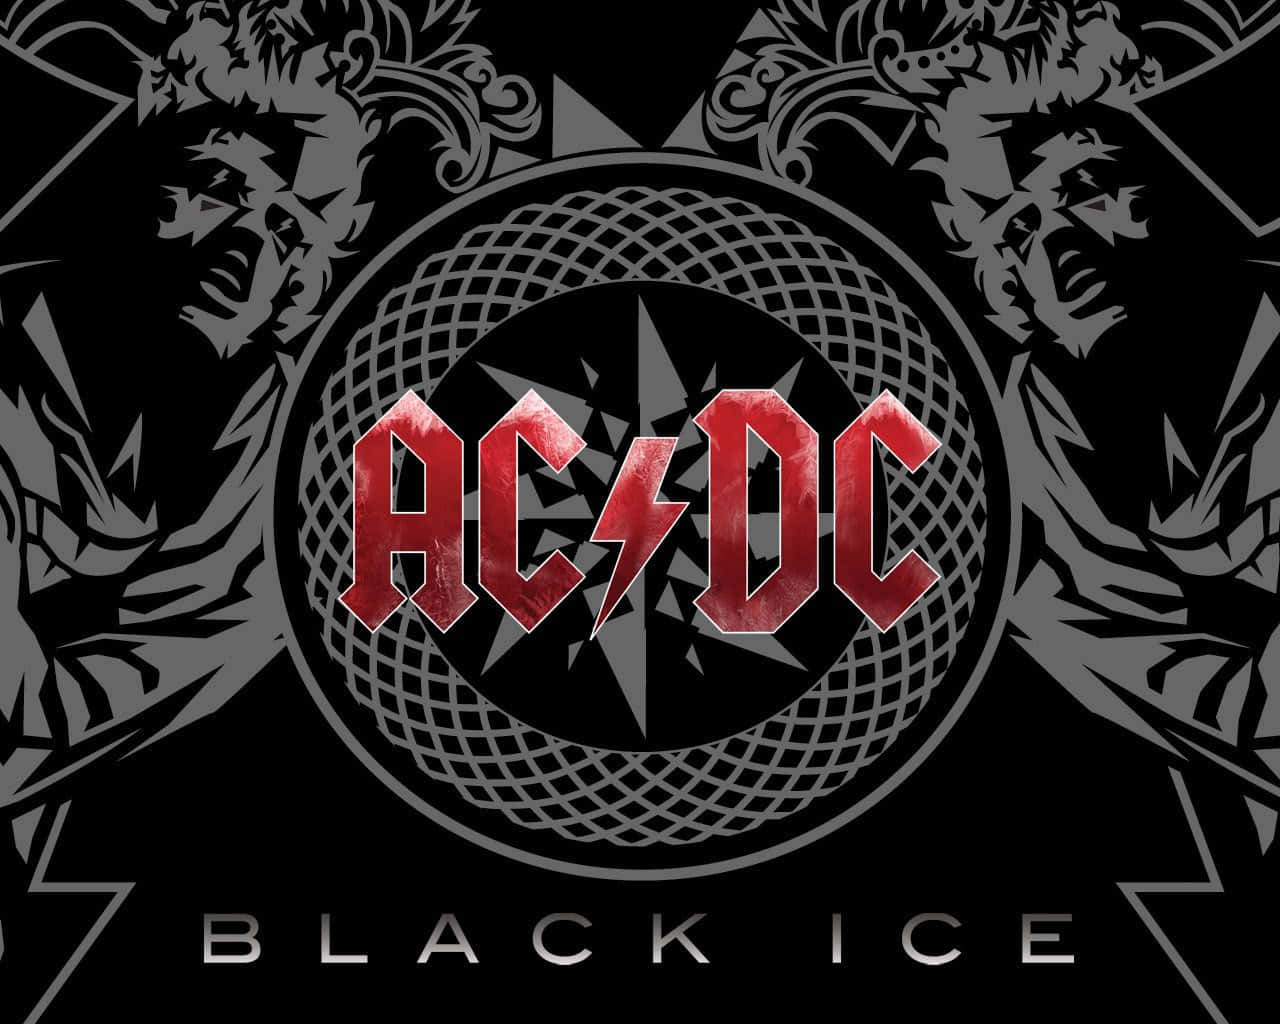 Legendary Rock Band Ac/dc In Concert Background